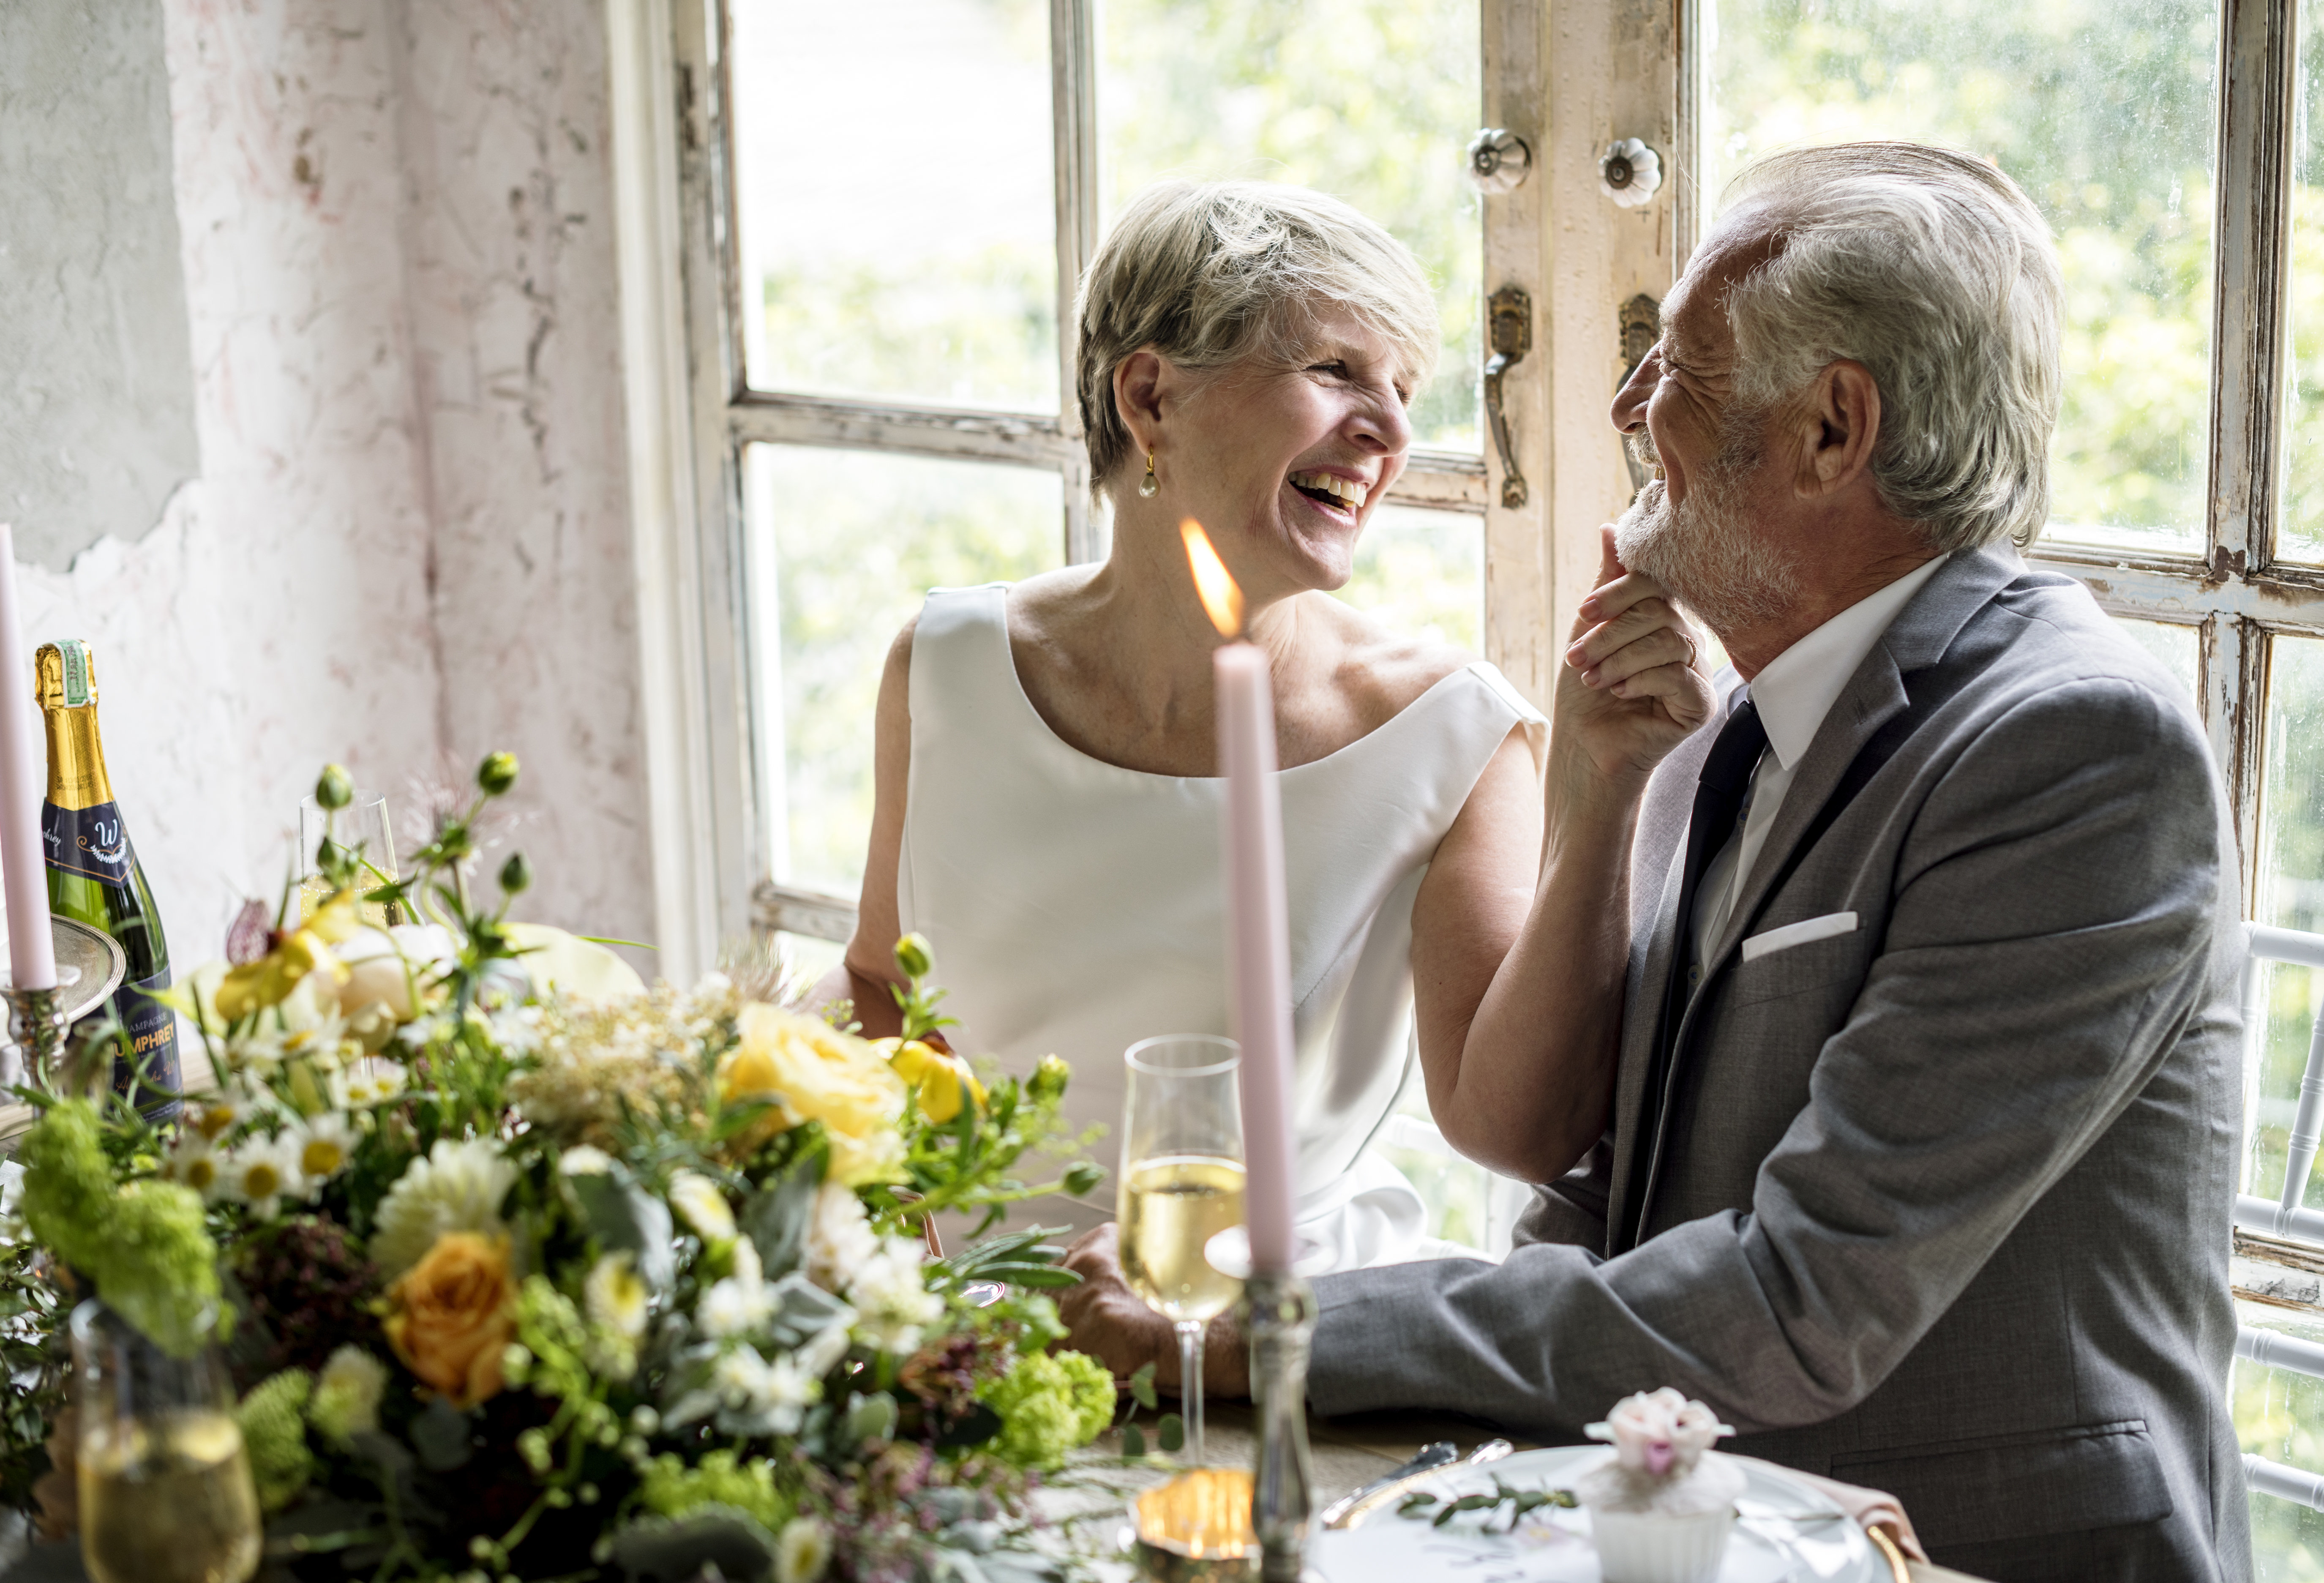 gift ideas for second marriage older couple